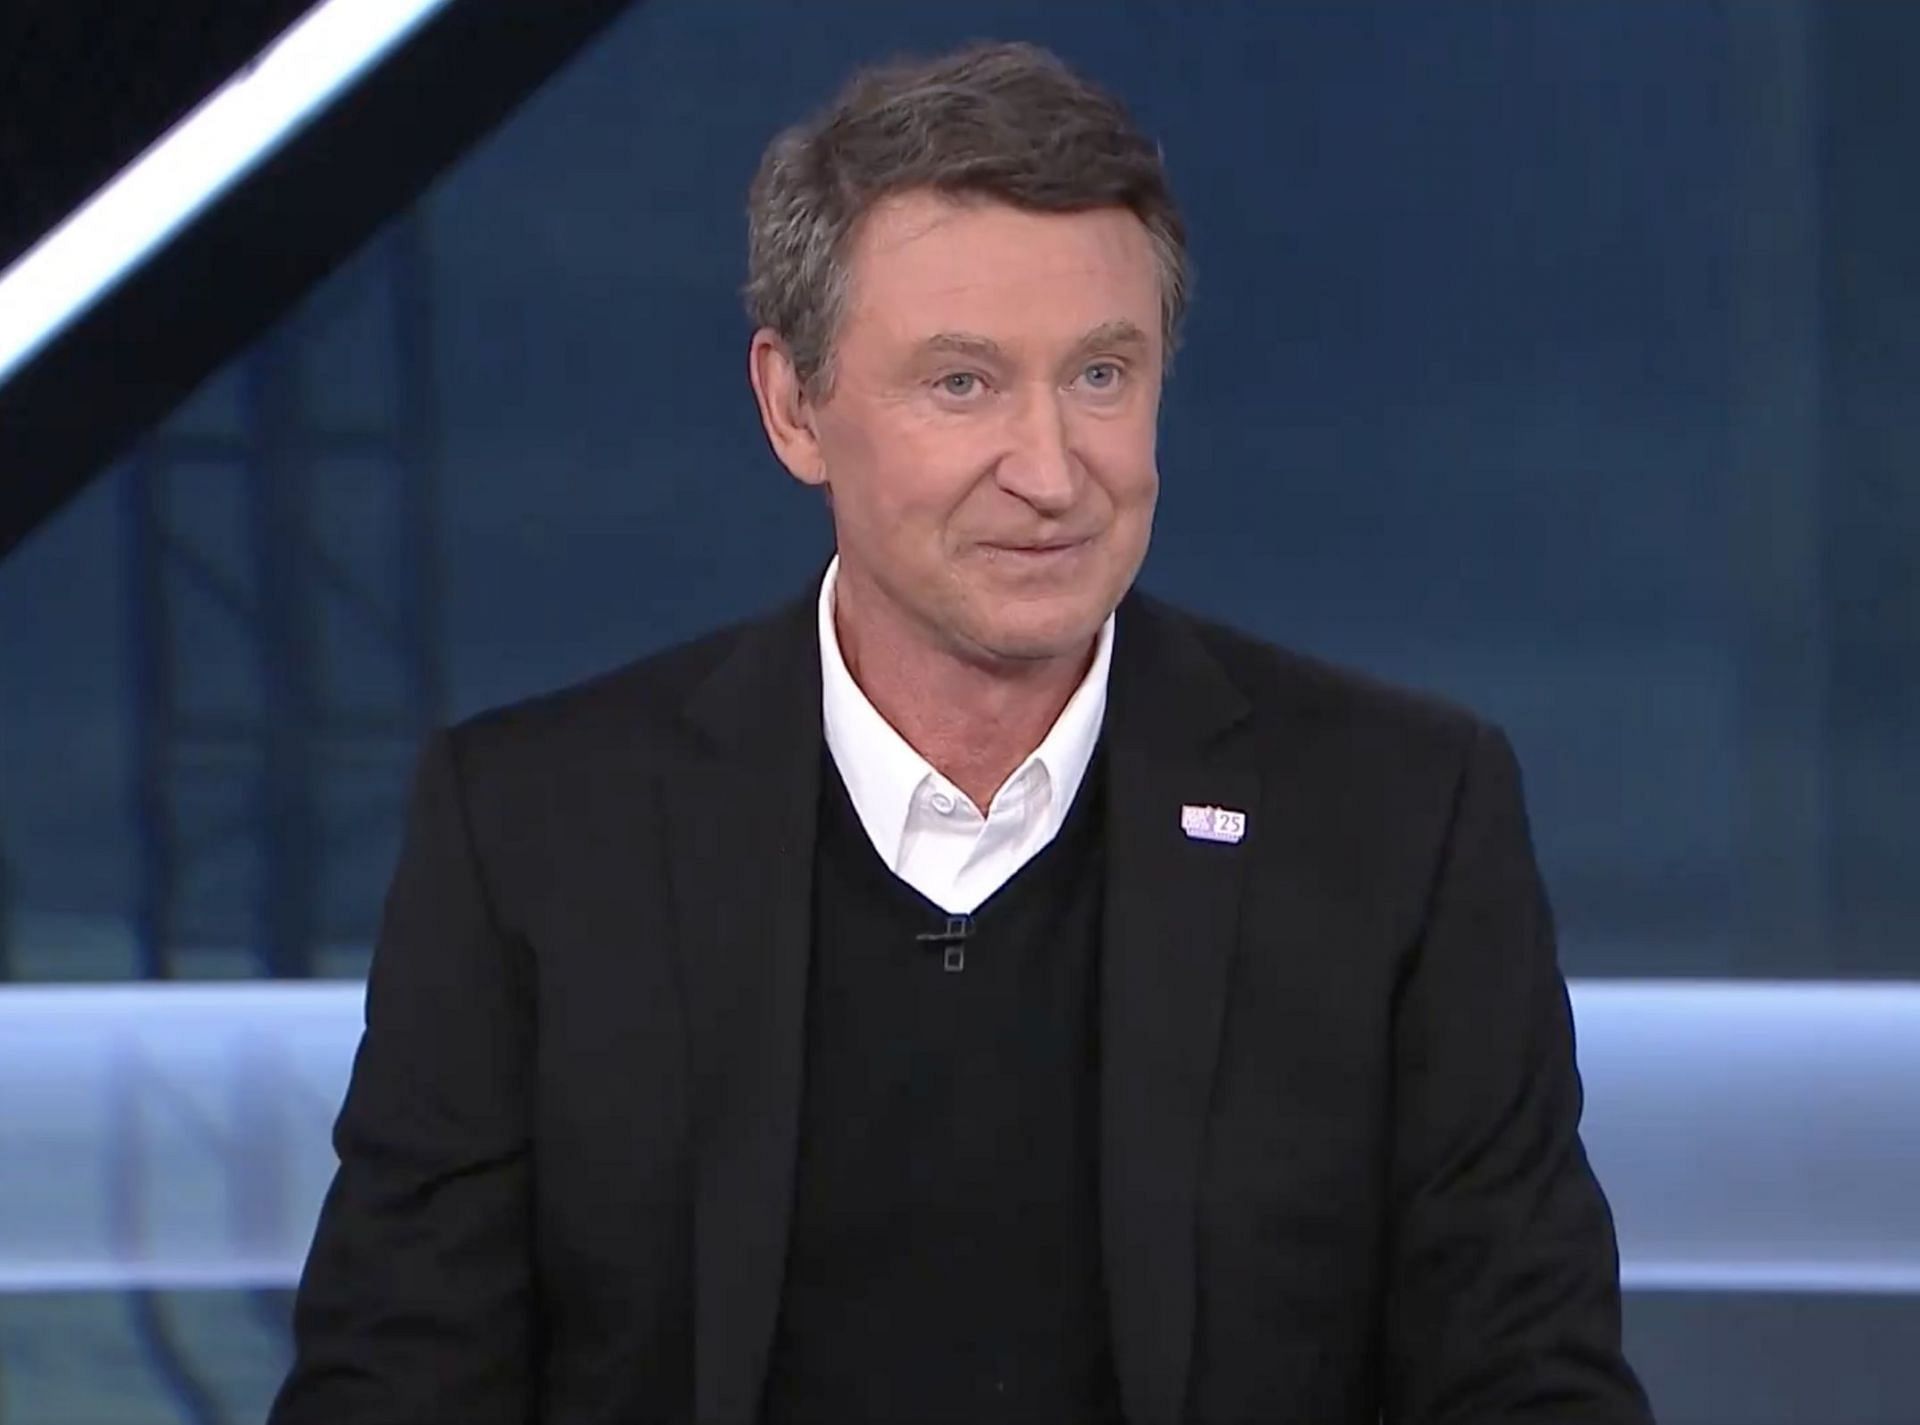 Wayne Gretzky shares hilarious chat with kid who tried to school him on how to hold hockey stick